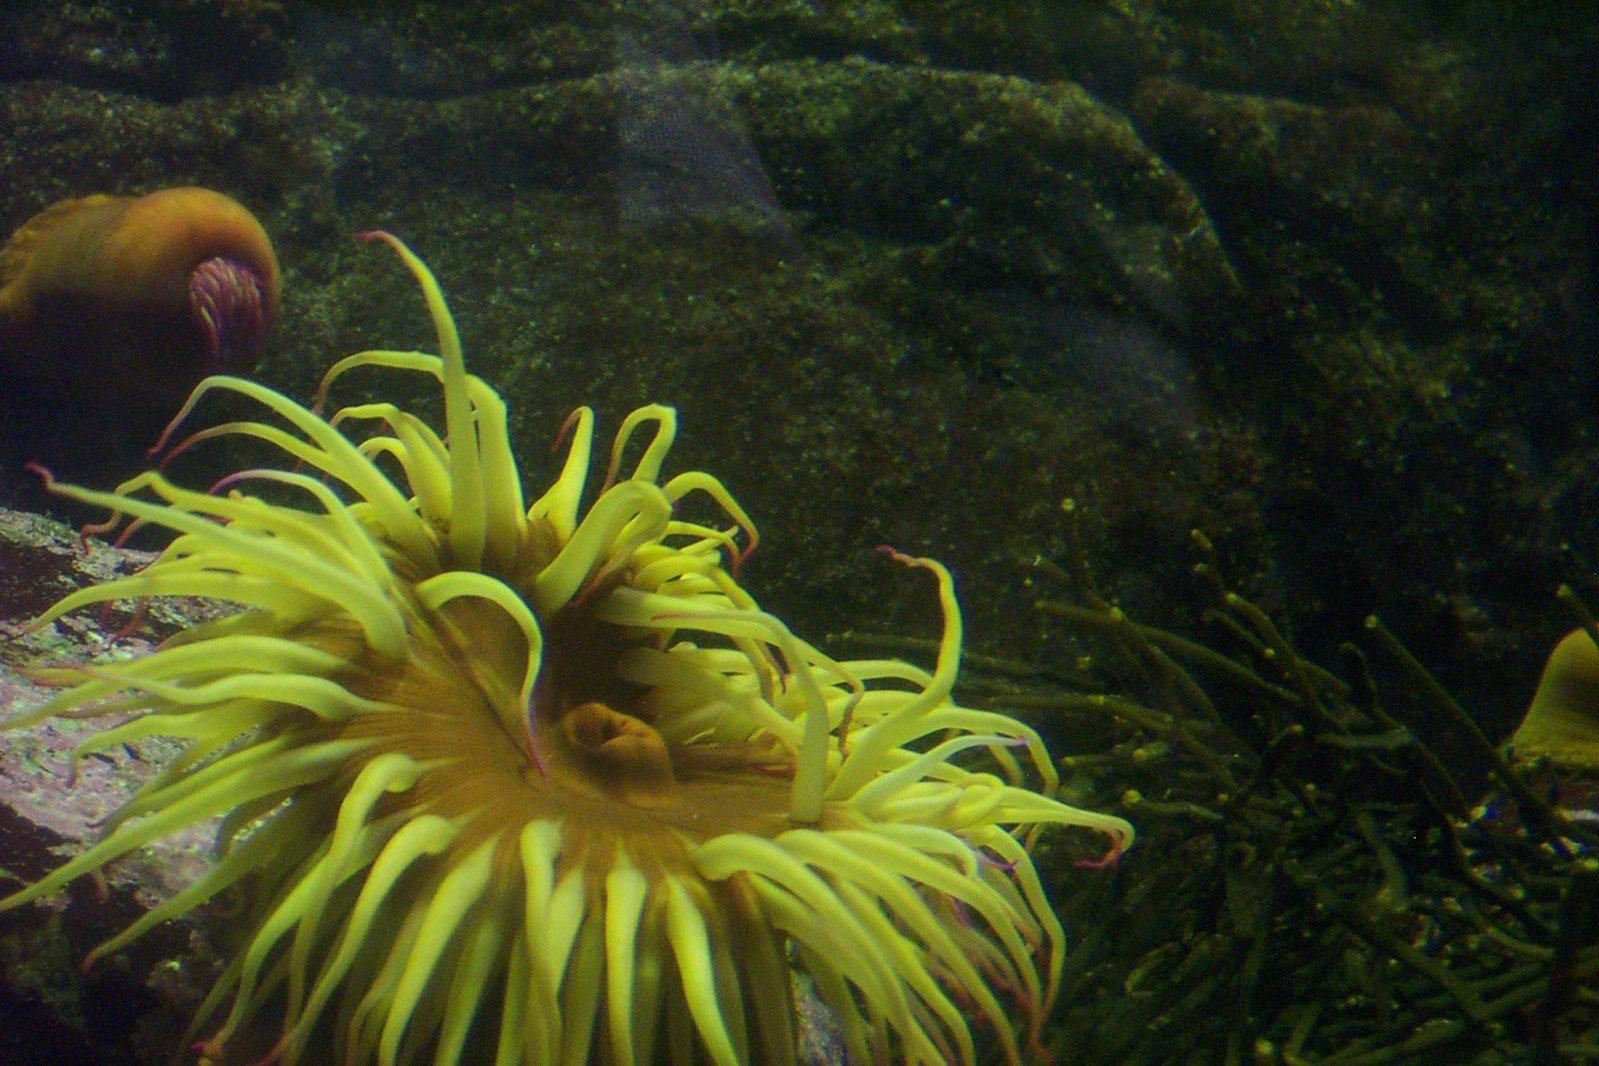 an animal with yellow hair on its head near water